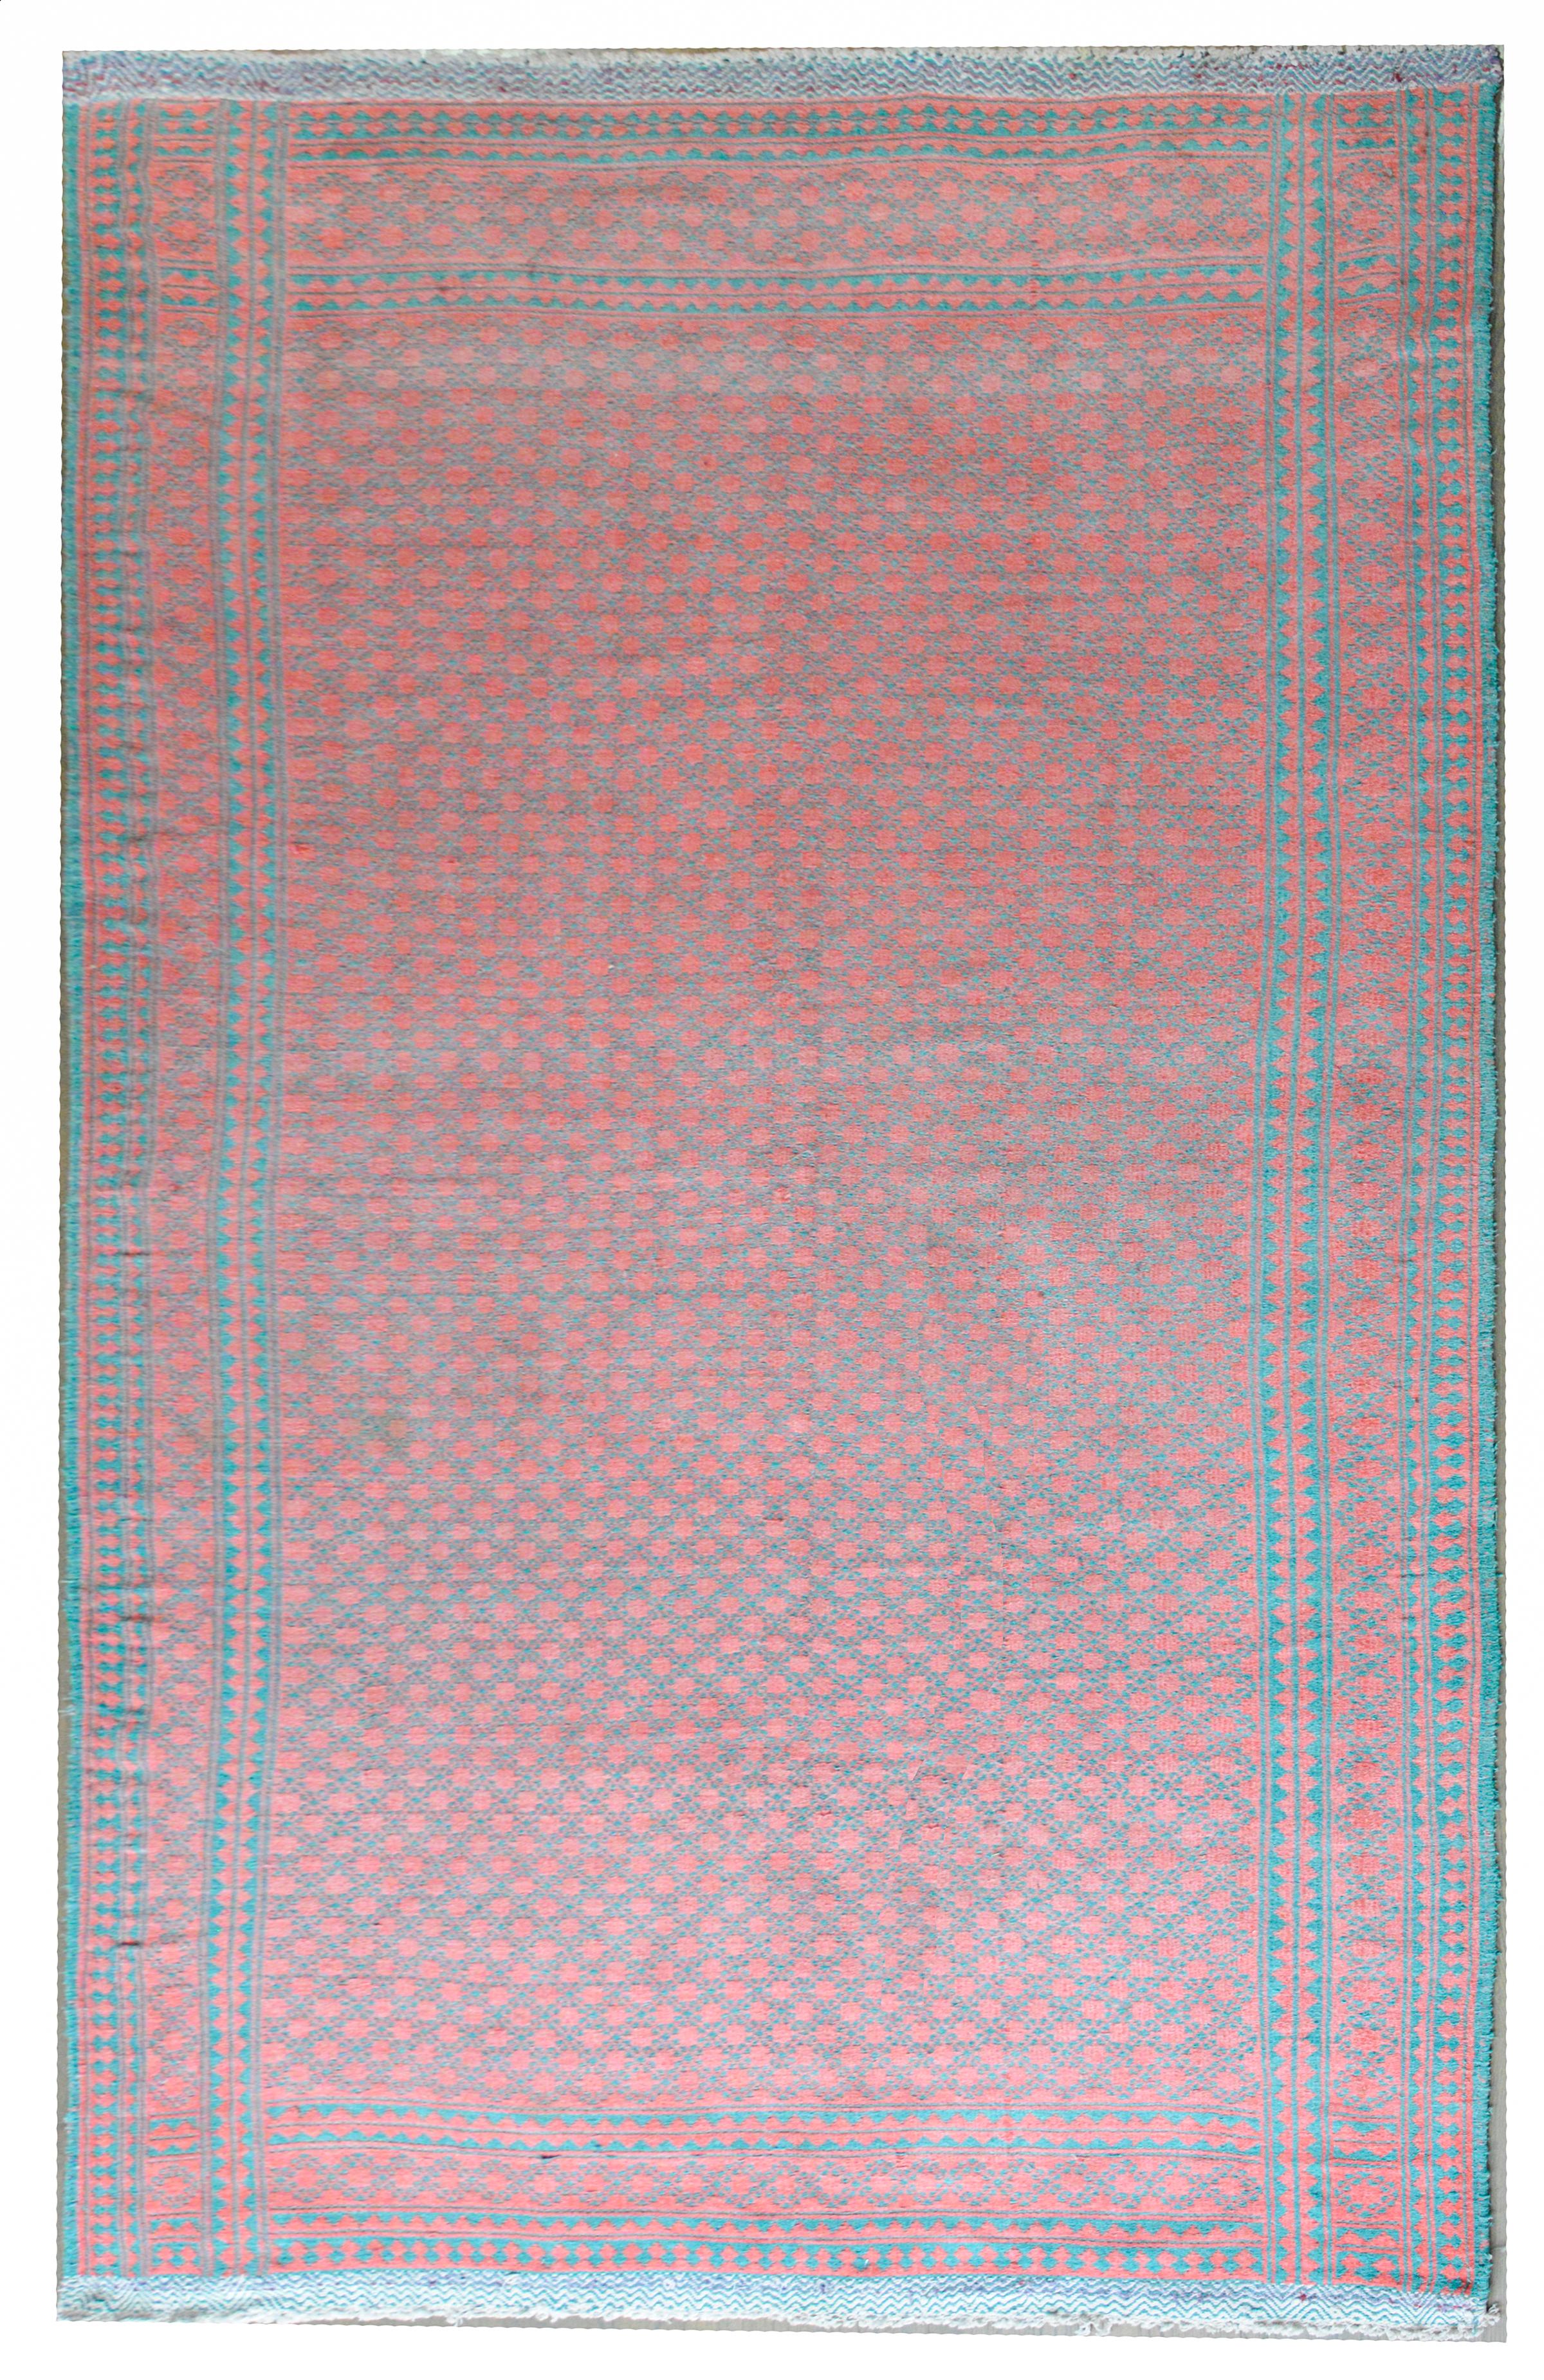 A fantastic mid-20th century Persian reversible Kilim rug with an all-over trellis start pattern in coral against a turquoise ground on one side, and the reverse with turquoise stars against a coral background on the other.